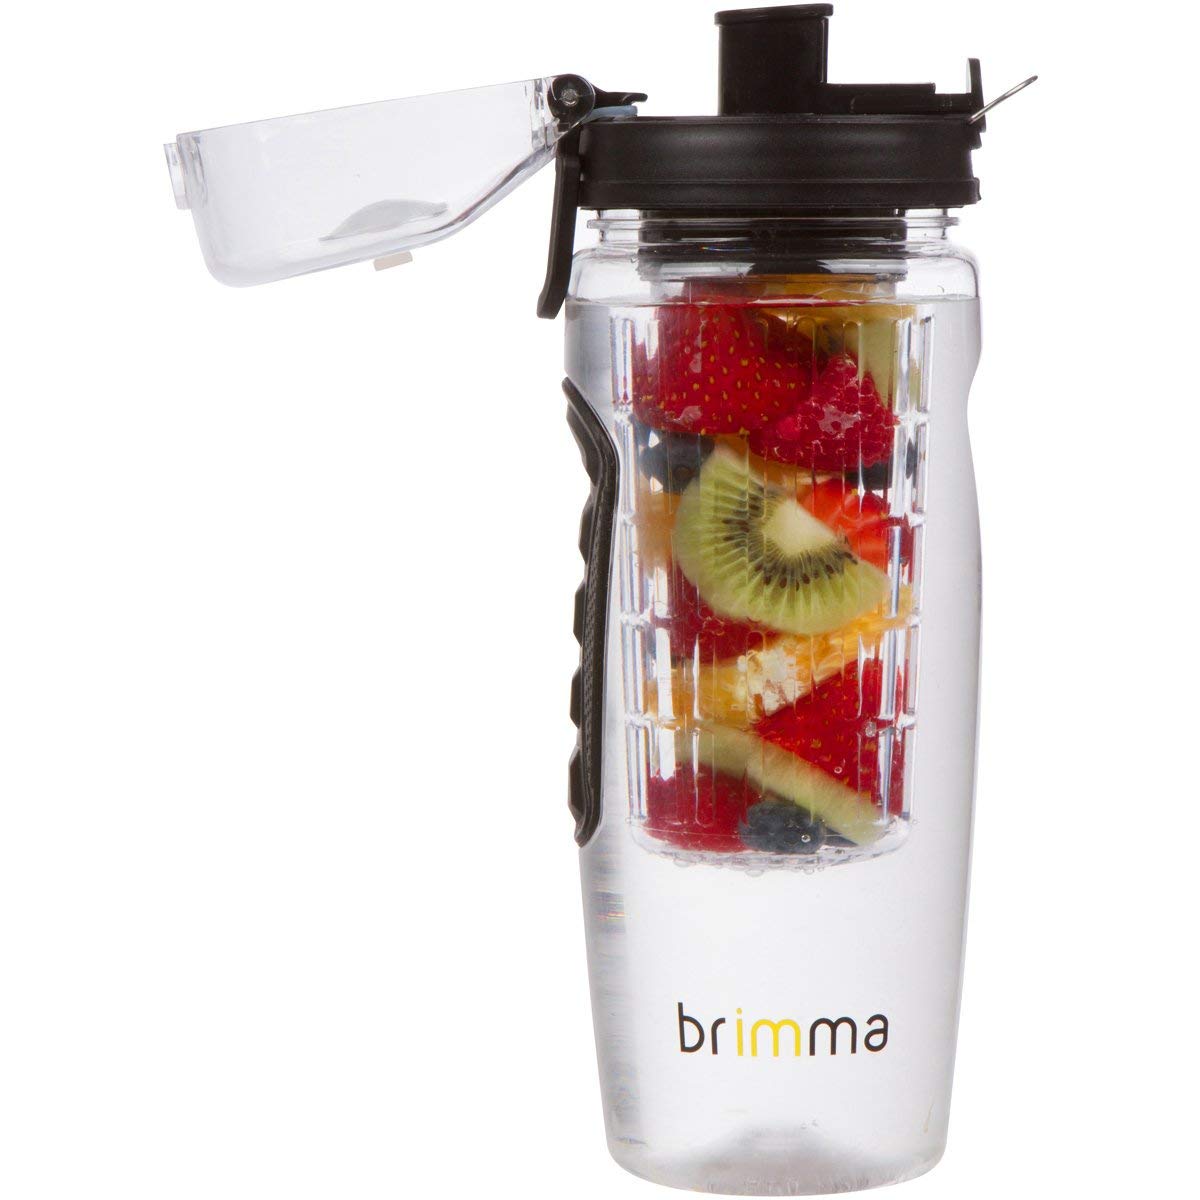 Stay energized on the move Carry this fruit infuser bottle